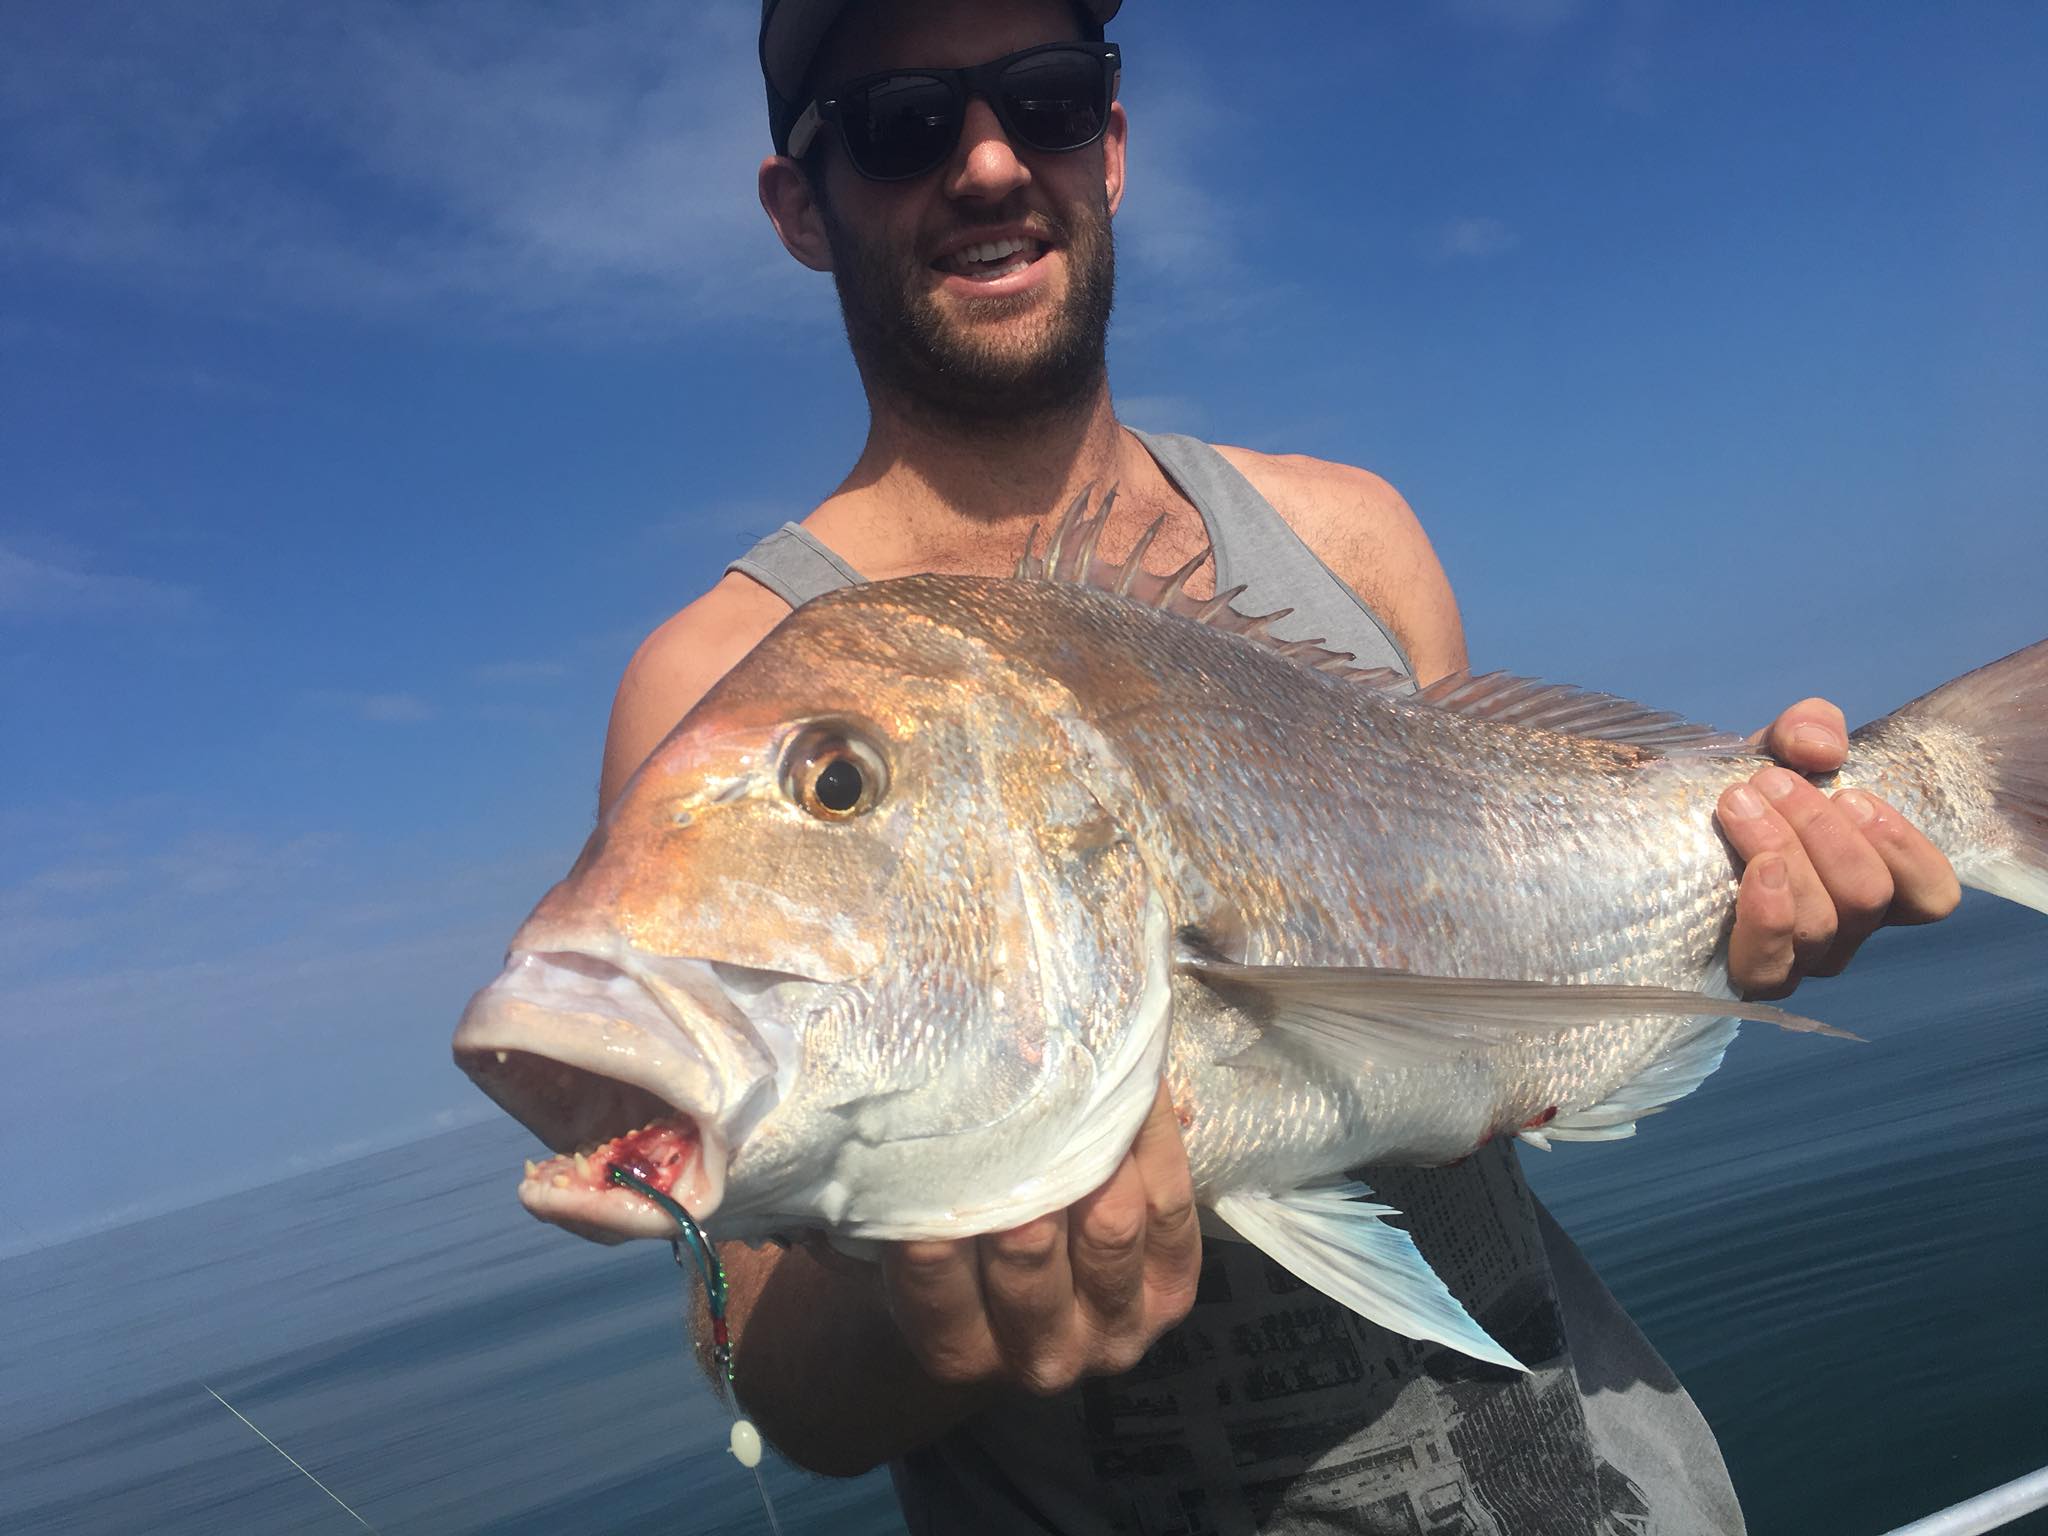 Adam and Fish of the Day Westicles Fishing - 1 December 2017